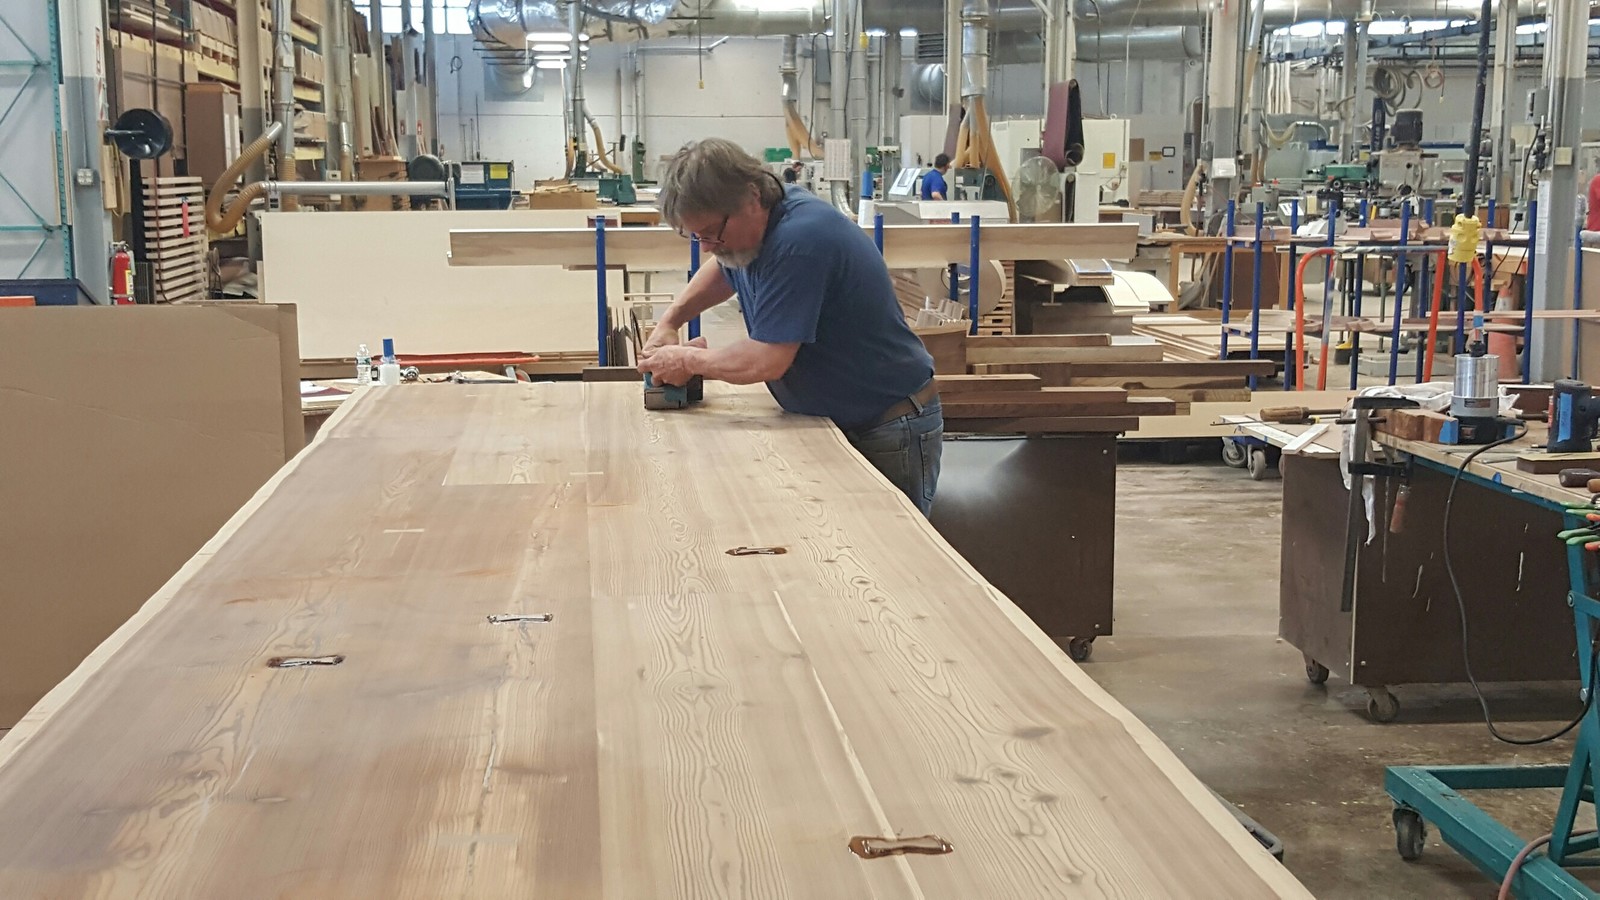 A conference table in the making in the shop